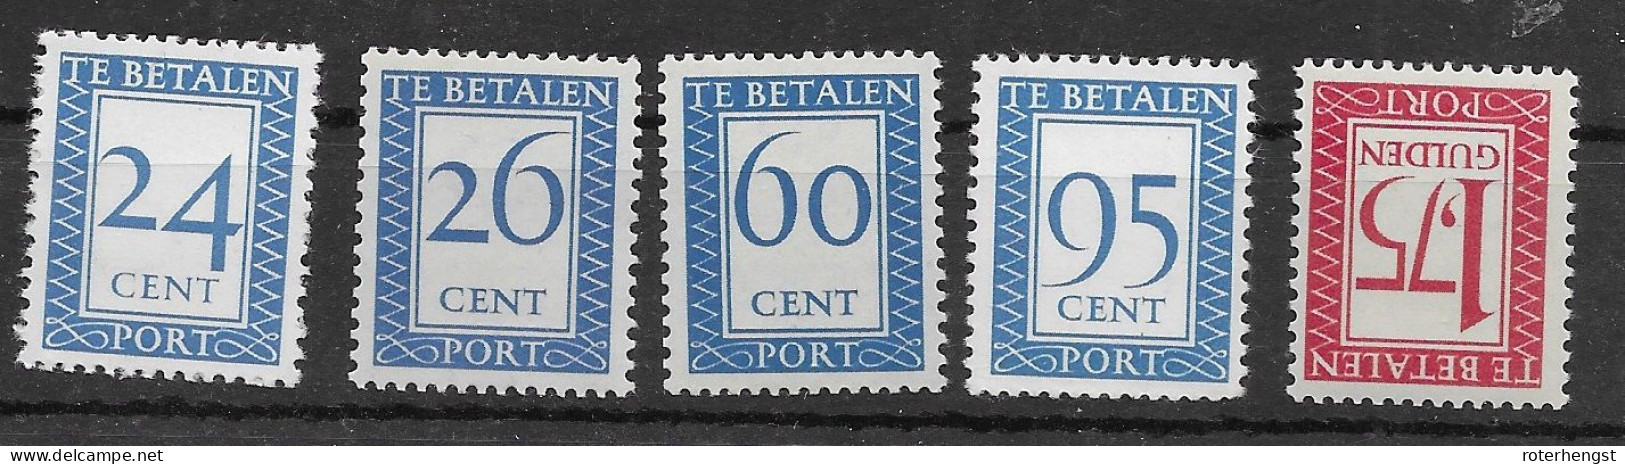 The Netherlands 1958 (15 Euros Mnh ** But 1 Stamp 1,75G Is Hinged*) - Postage Due